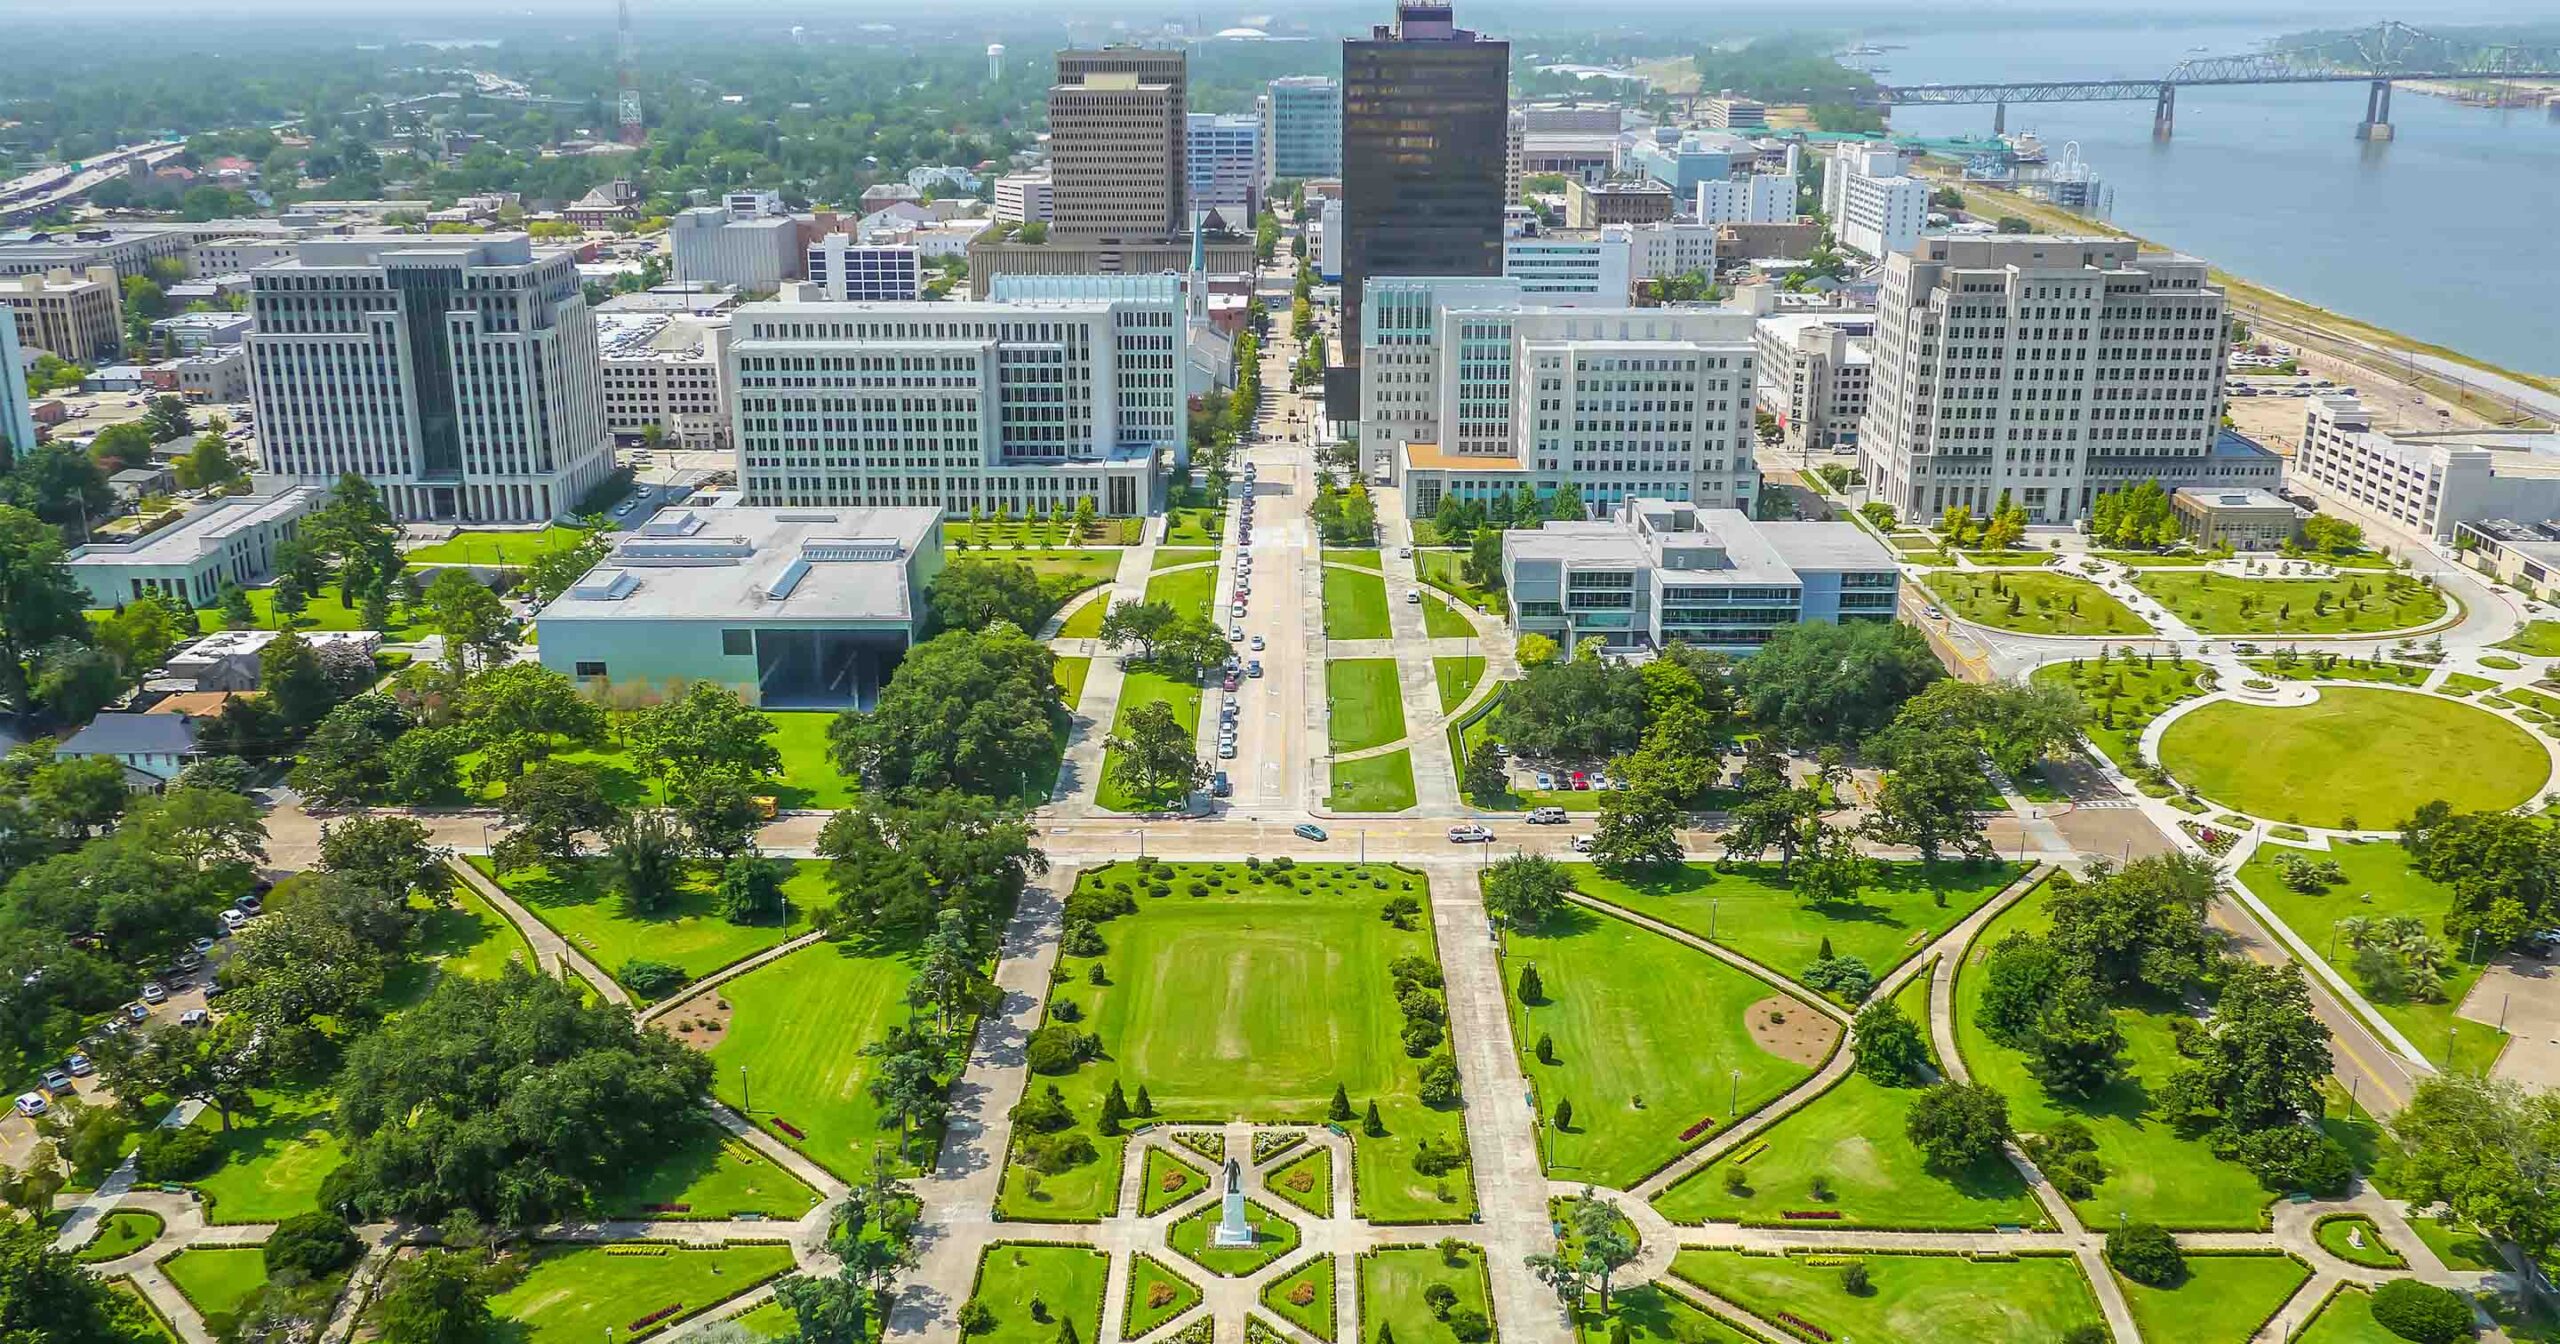 Relocation Guide: Moving to Baton Rouge, LA